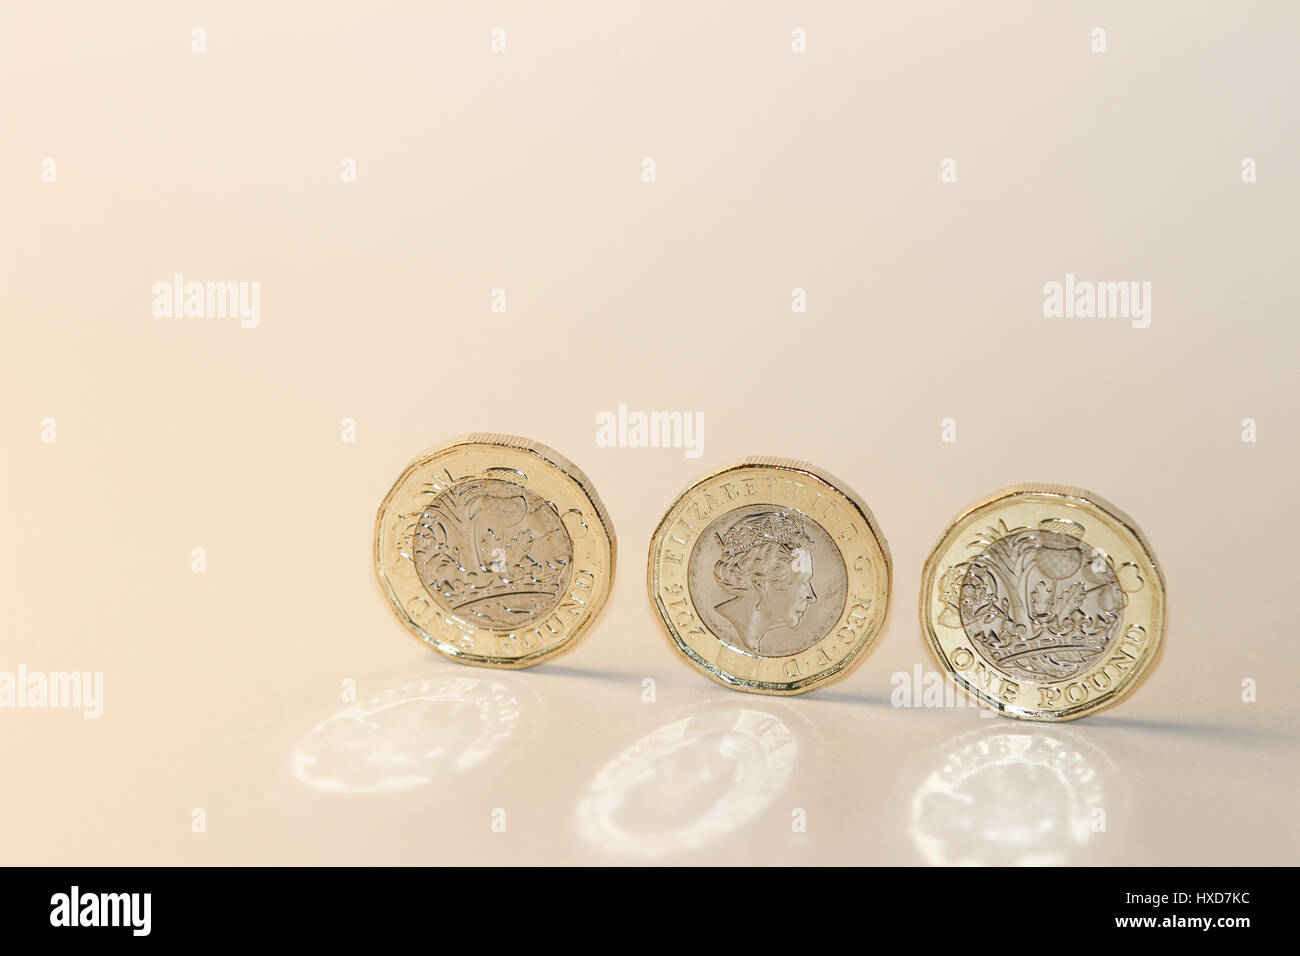 Newcastle upon Tyne, England, UK. Tuesday, 28 March, 2017. New British pound coin is issued. Credit: Andrew Nicholson/Alamy Live News Stock Photo